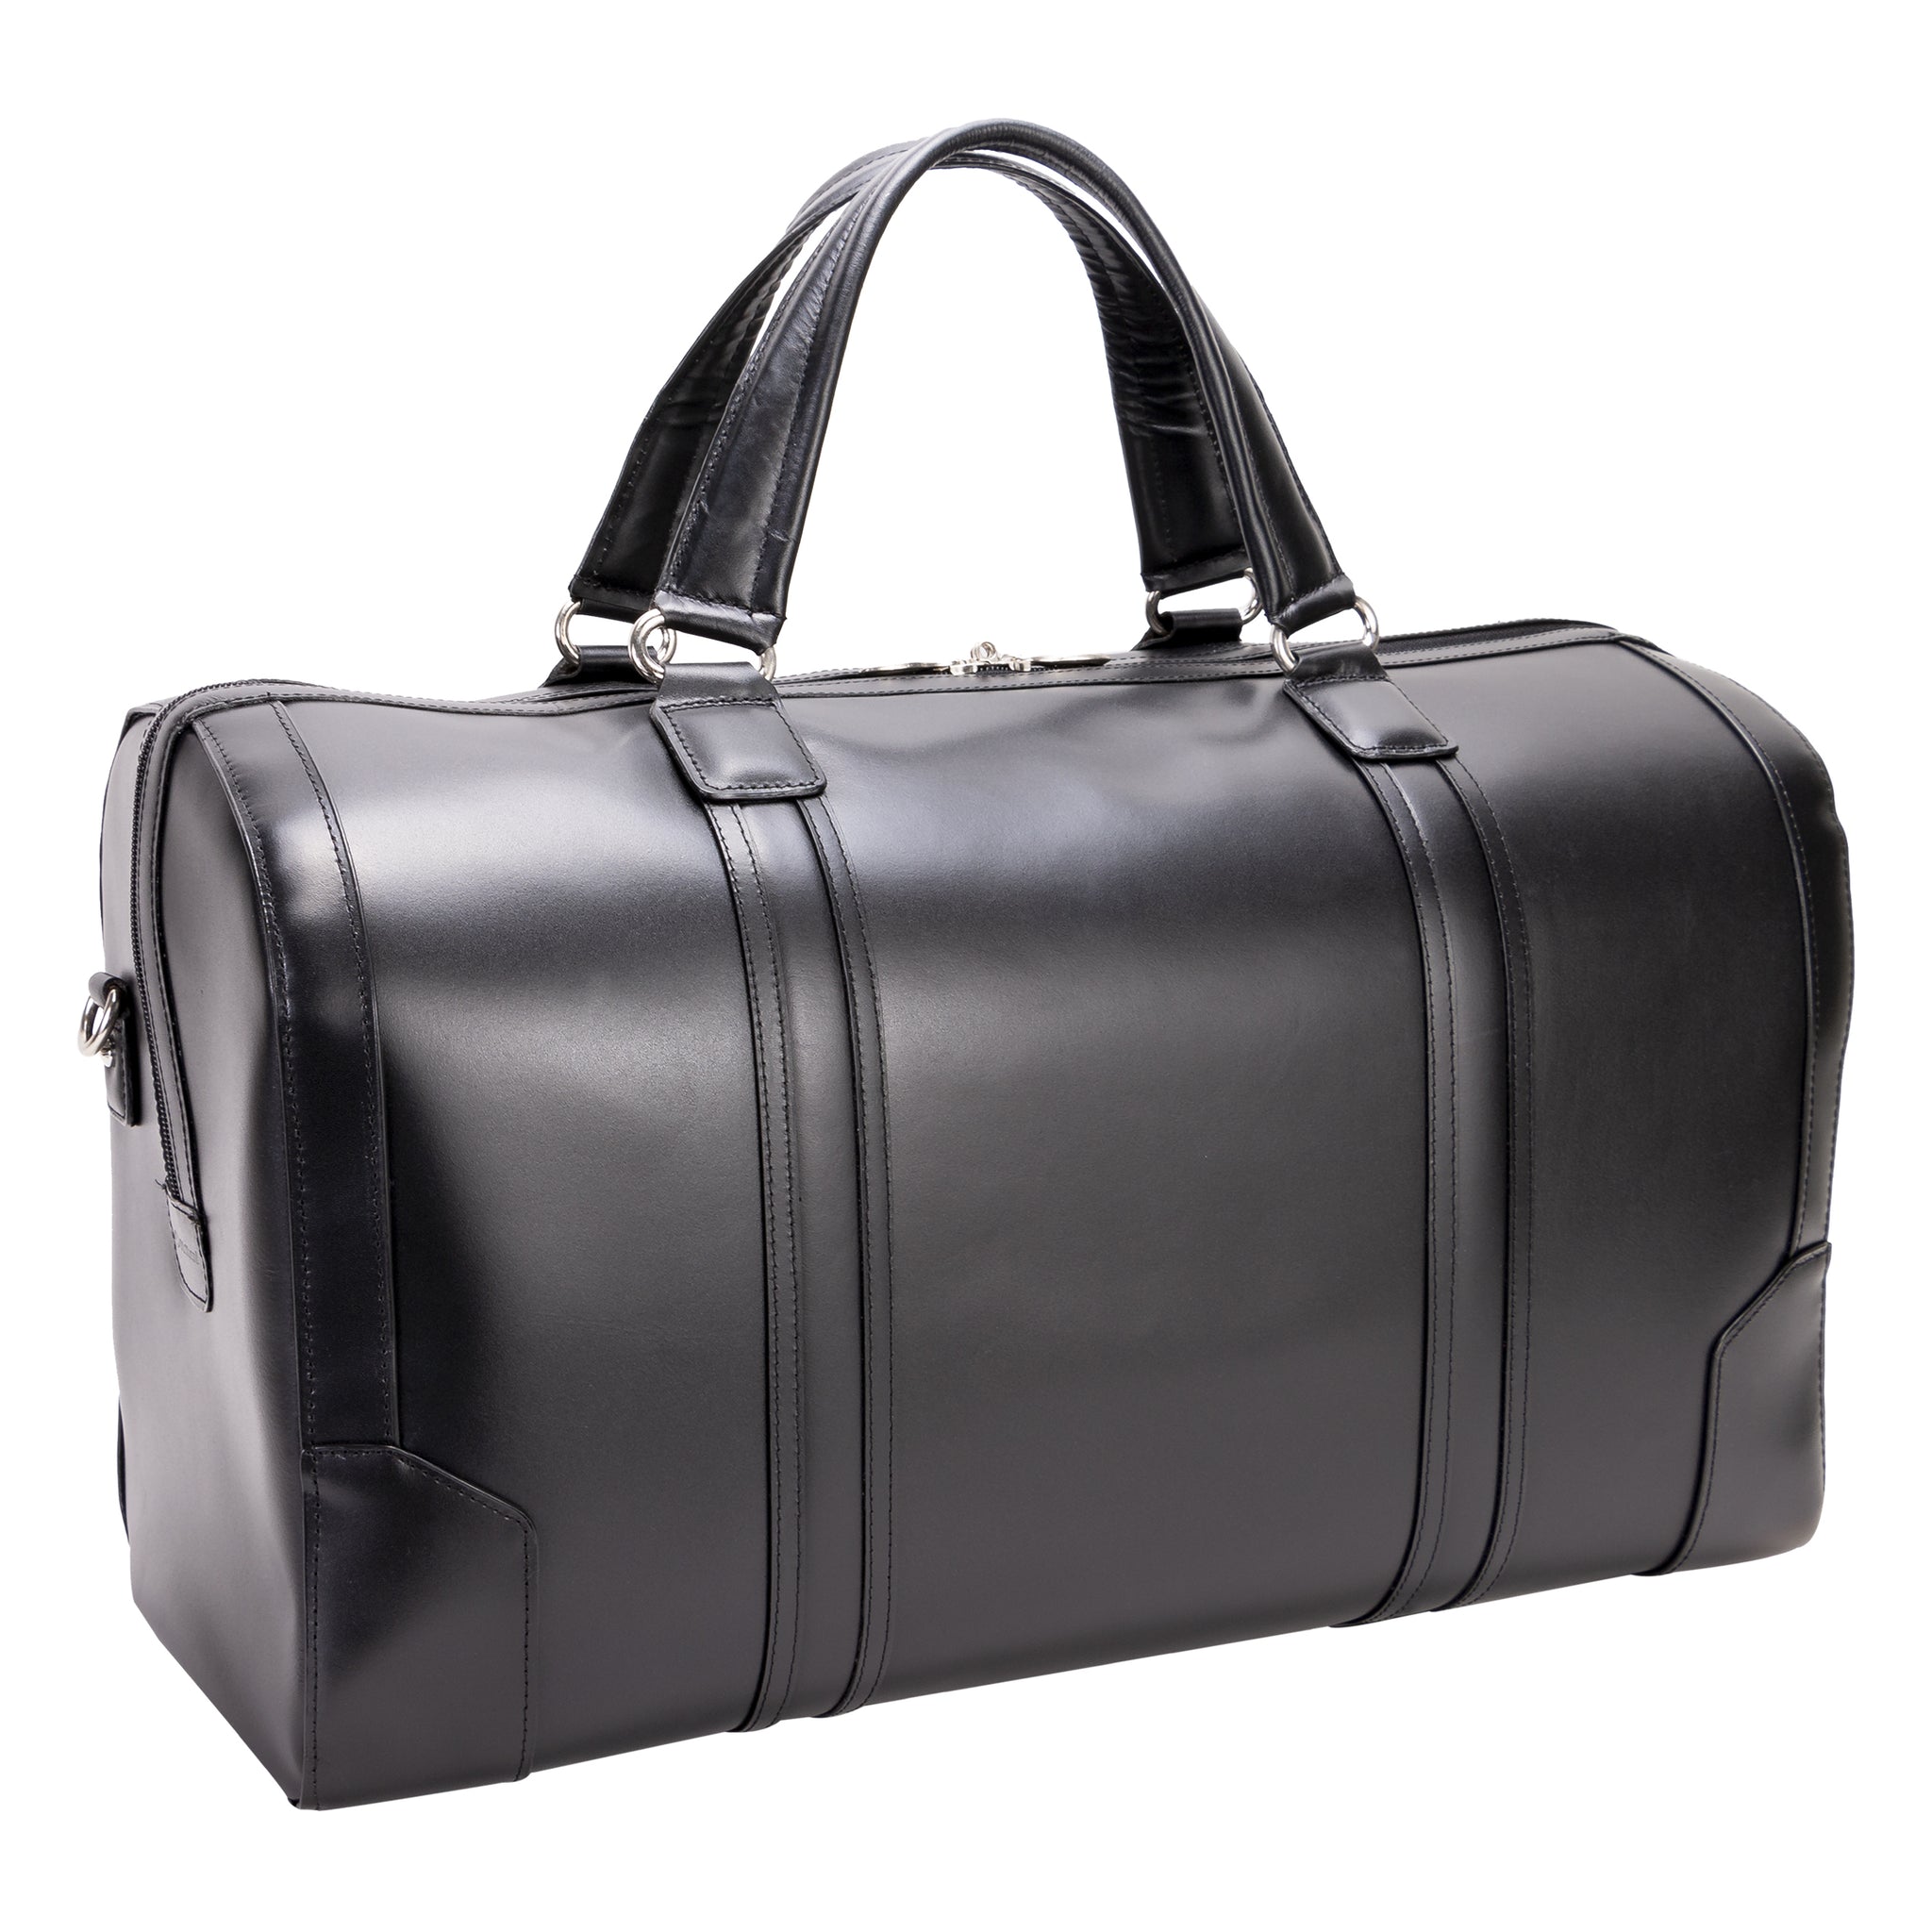 McKlein KINZIE 20" Carry-all Leather Duffel